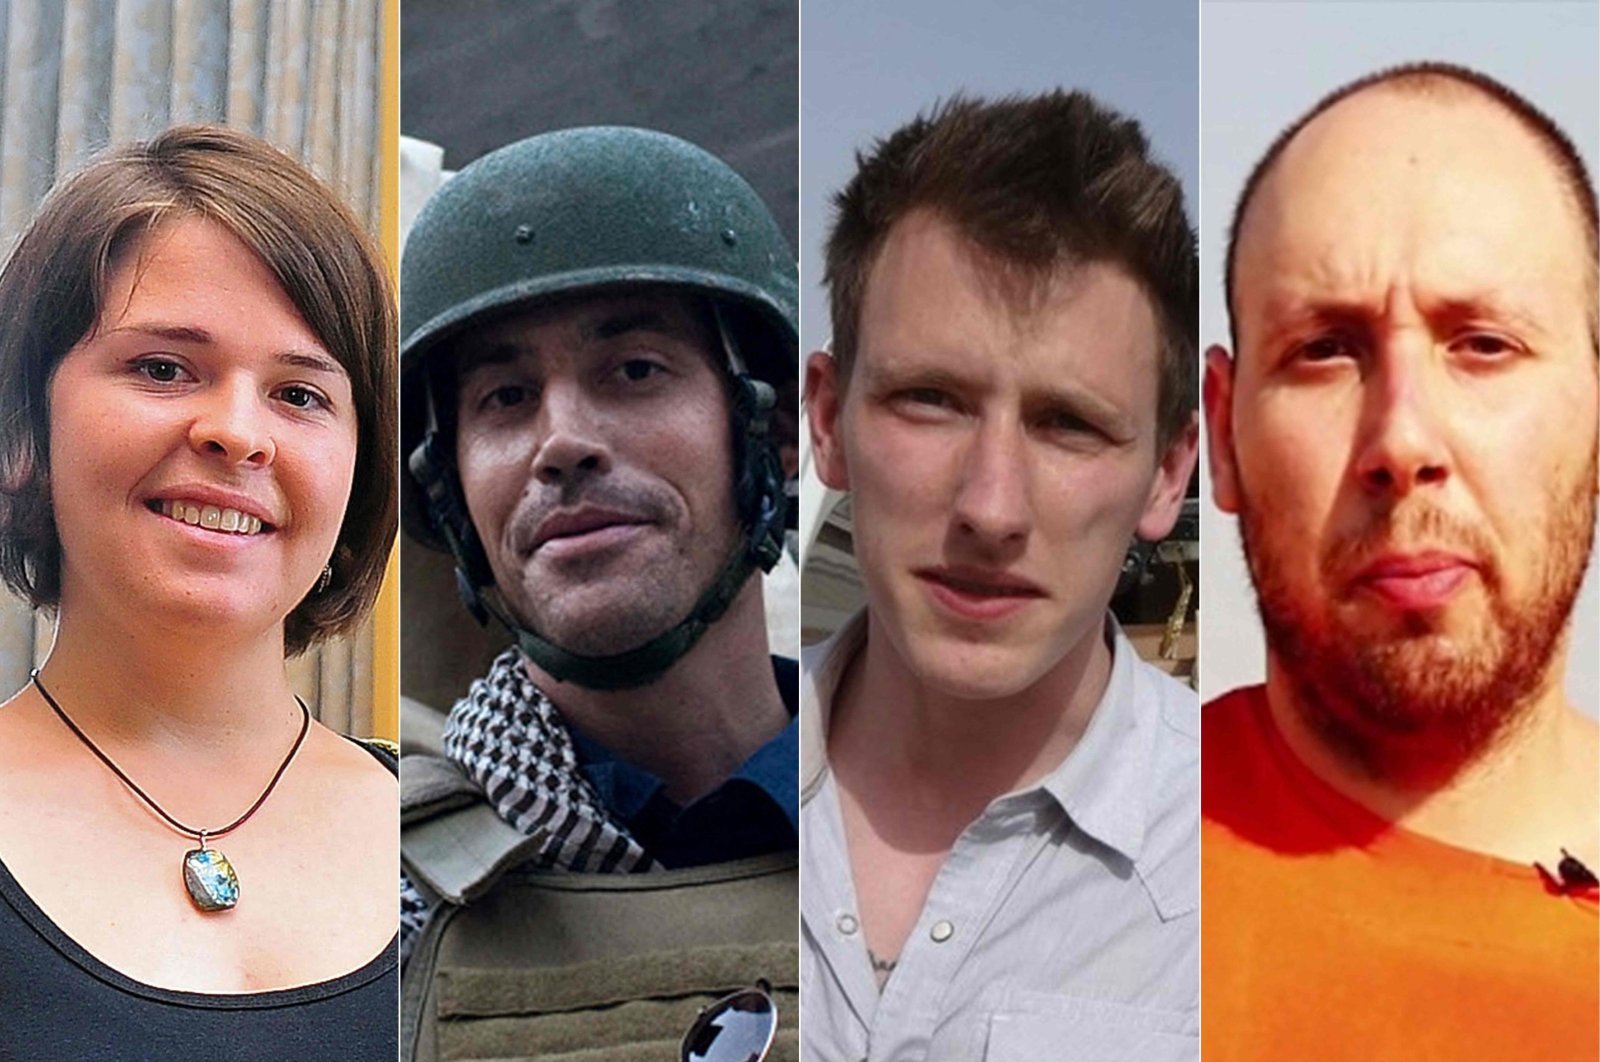 This combination of file photos created on Oct. 28, 2019, shows (L-R) aid worker Kayla Mueller, freelance reporter James Foley, aid worker Peter Kassig and journalist Steven Sotloff. (AFP)